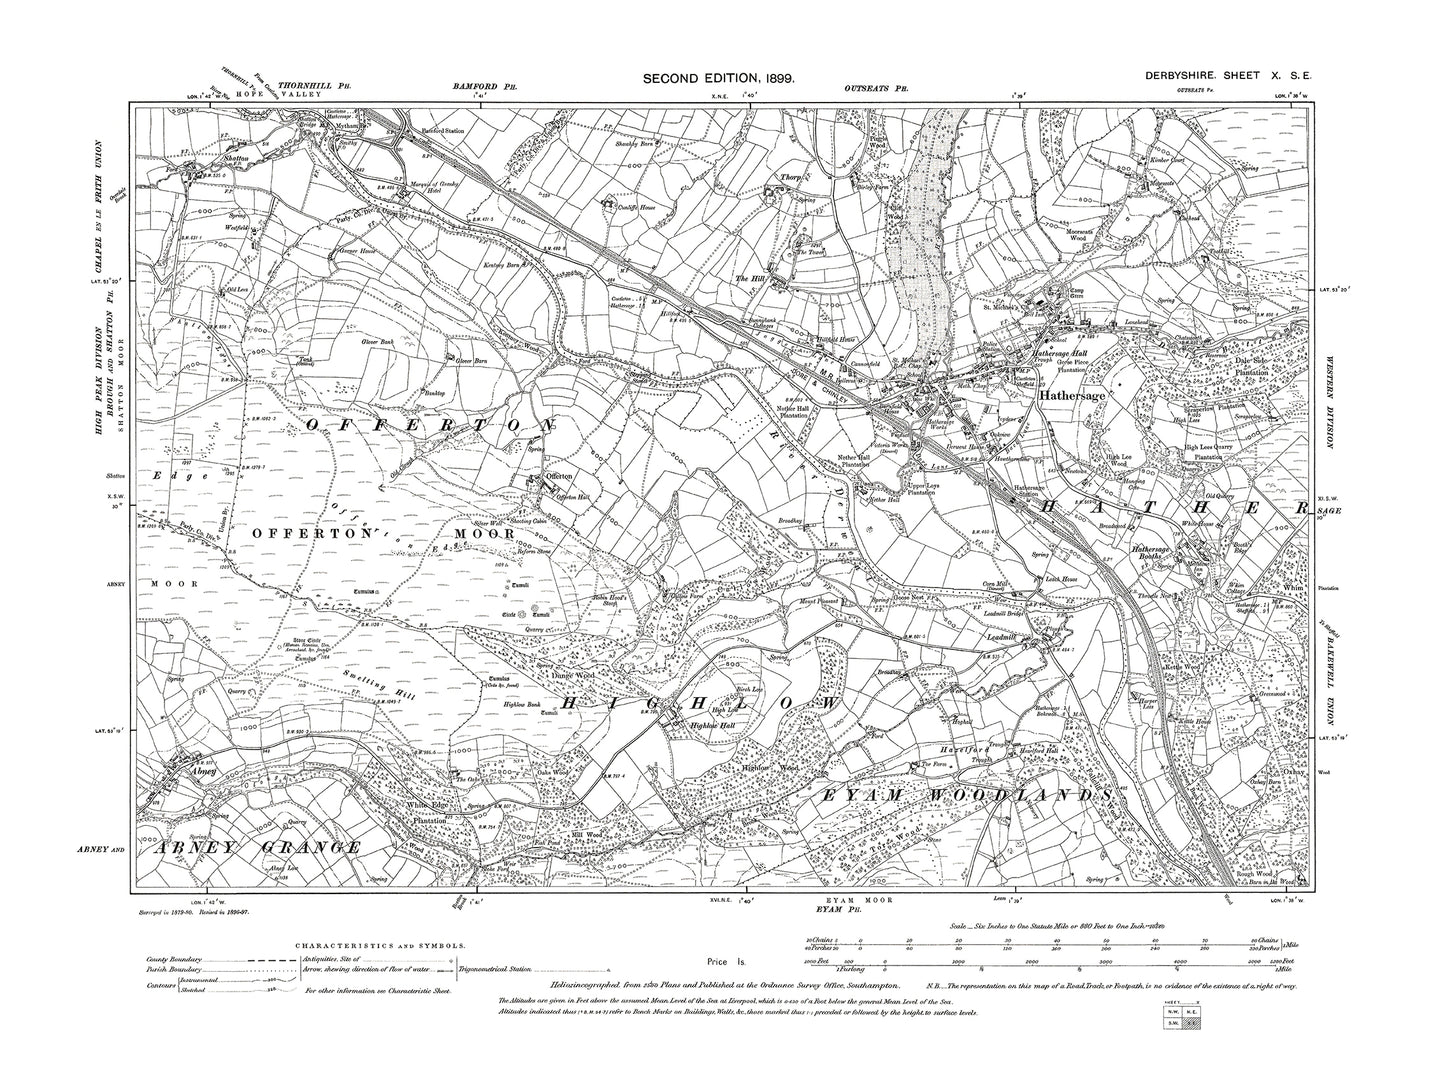 Old OS map dated 1899, showing Hathersage in Derbyshire 10SE